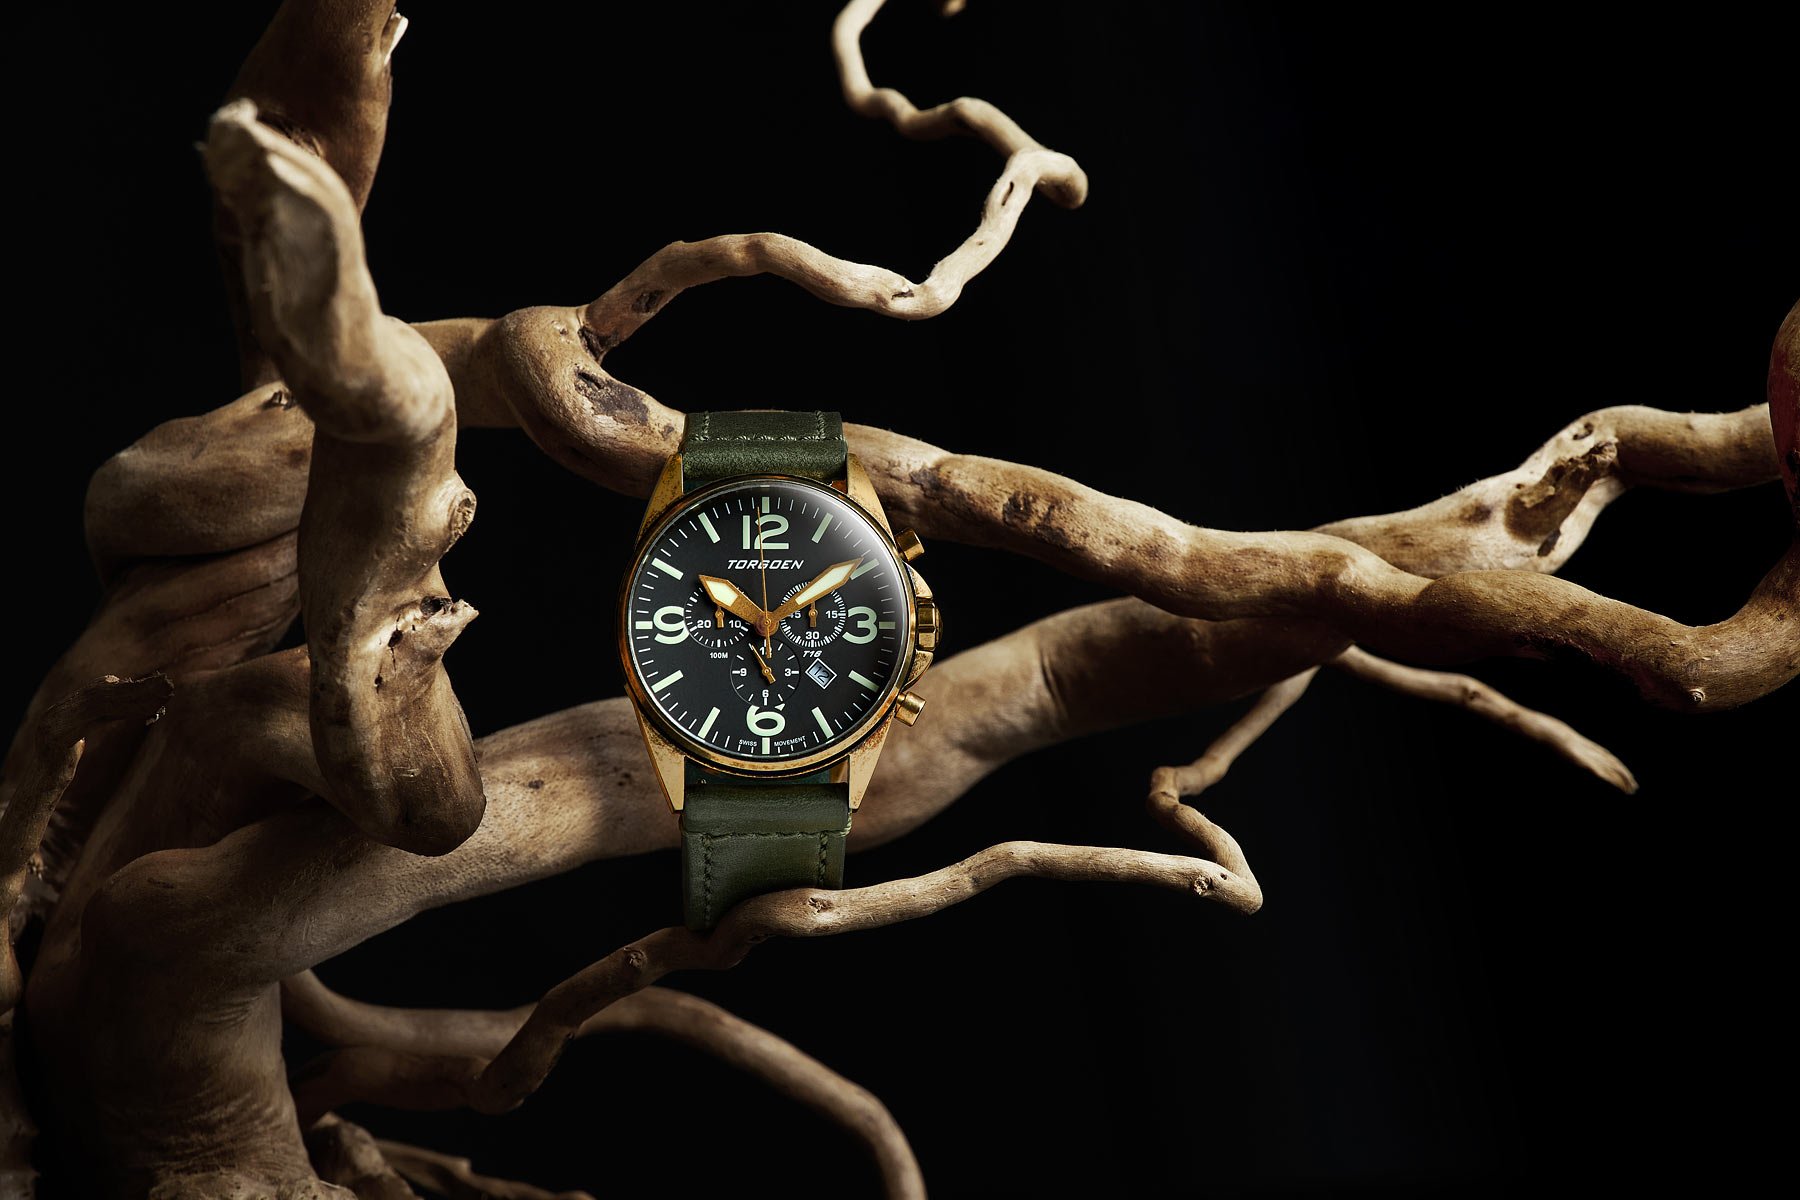 Natural concept advertising photo for Torgoen watches